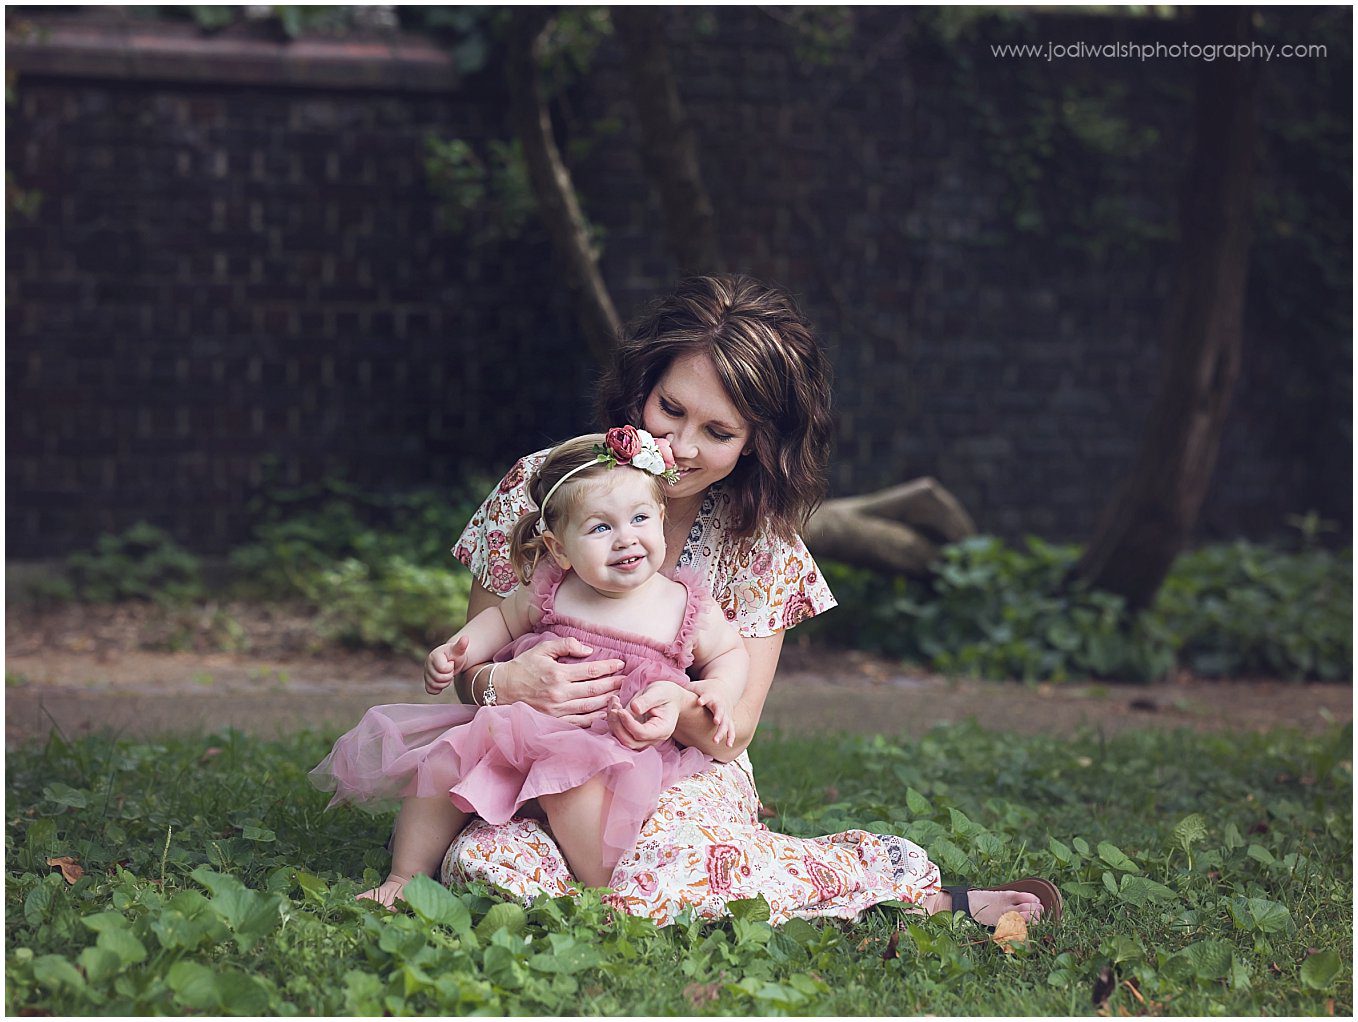 image of a mother holding her young daughter in her lap while sitting in a walled garden at Mellon Park.